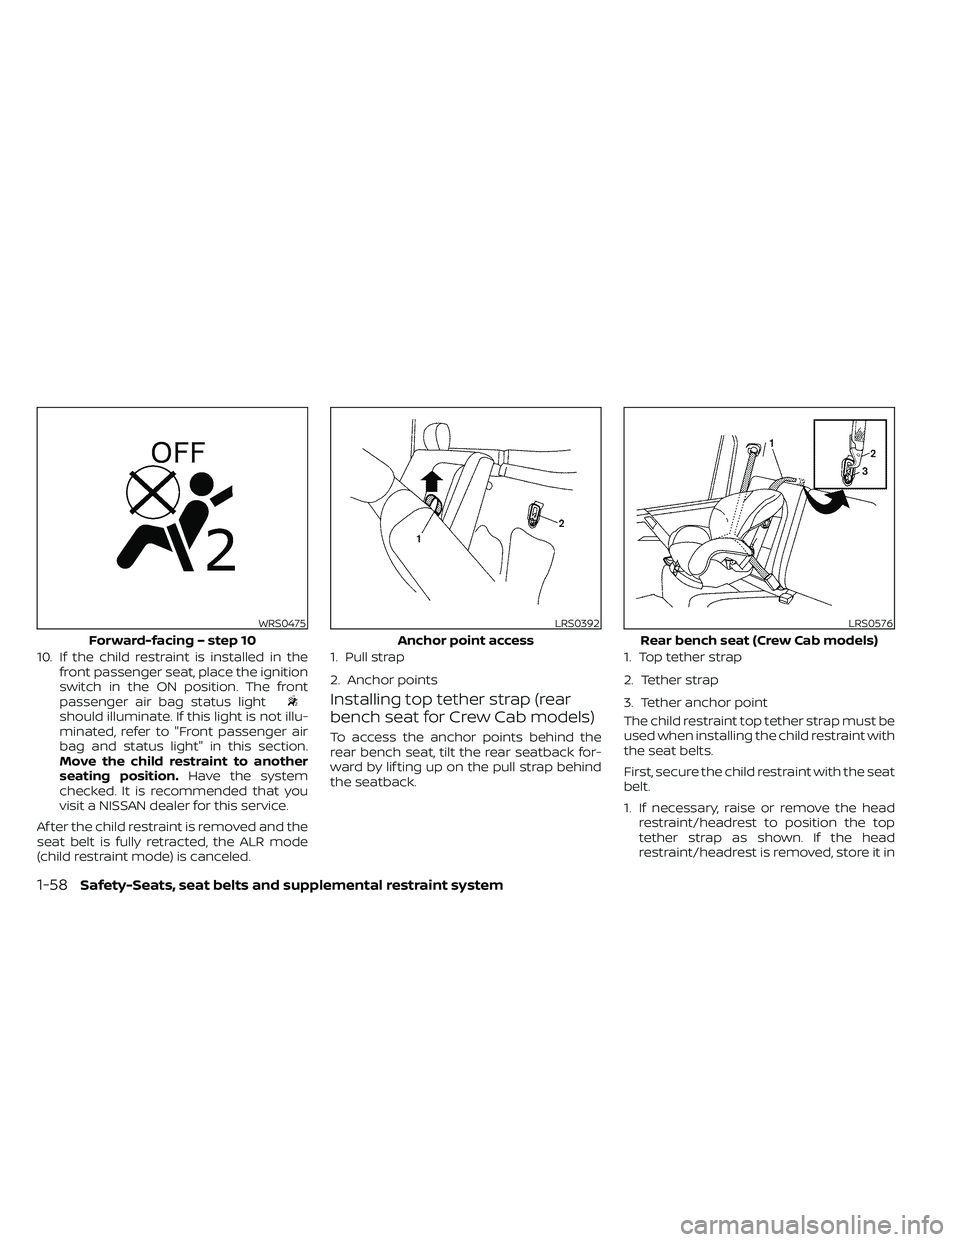 NISSAN FRONTIER 2021  Owners Manual 10. If the child restraint is installed in thefront passenger seat, place the ignition
switch in the ON position. The front
passenger air bag status light
should illuminate. If this light is not illu-